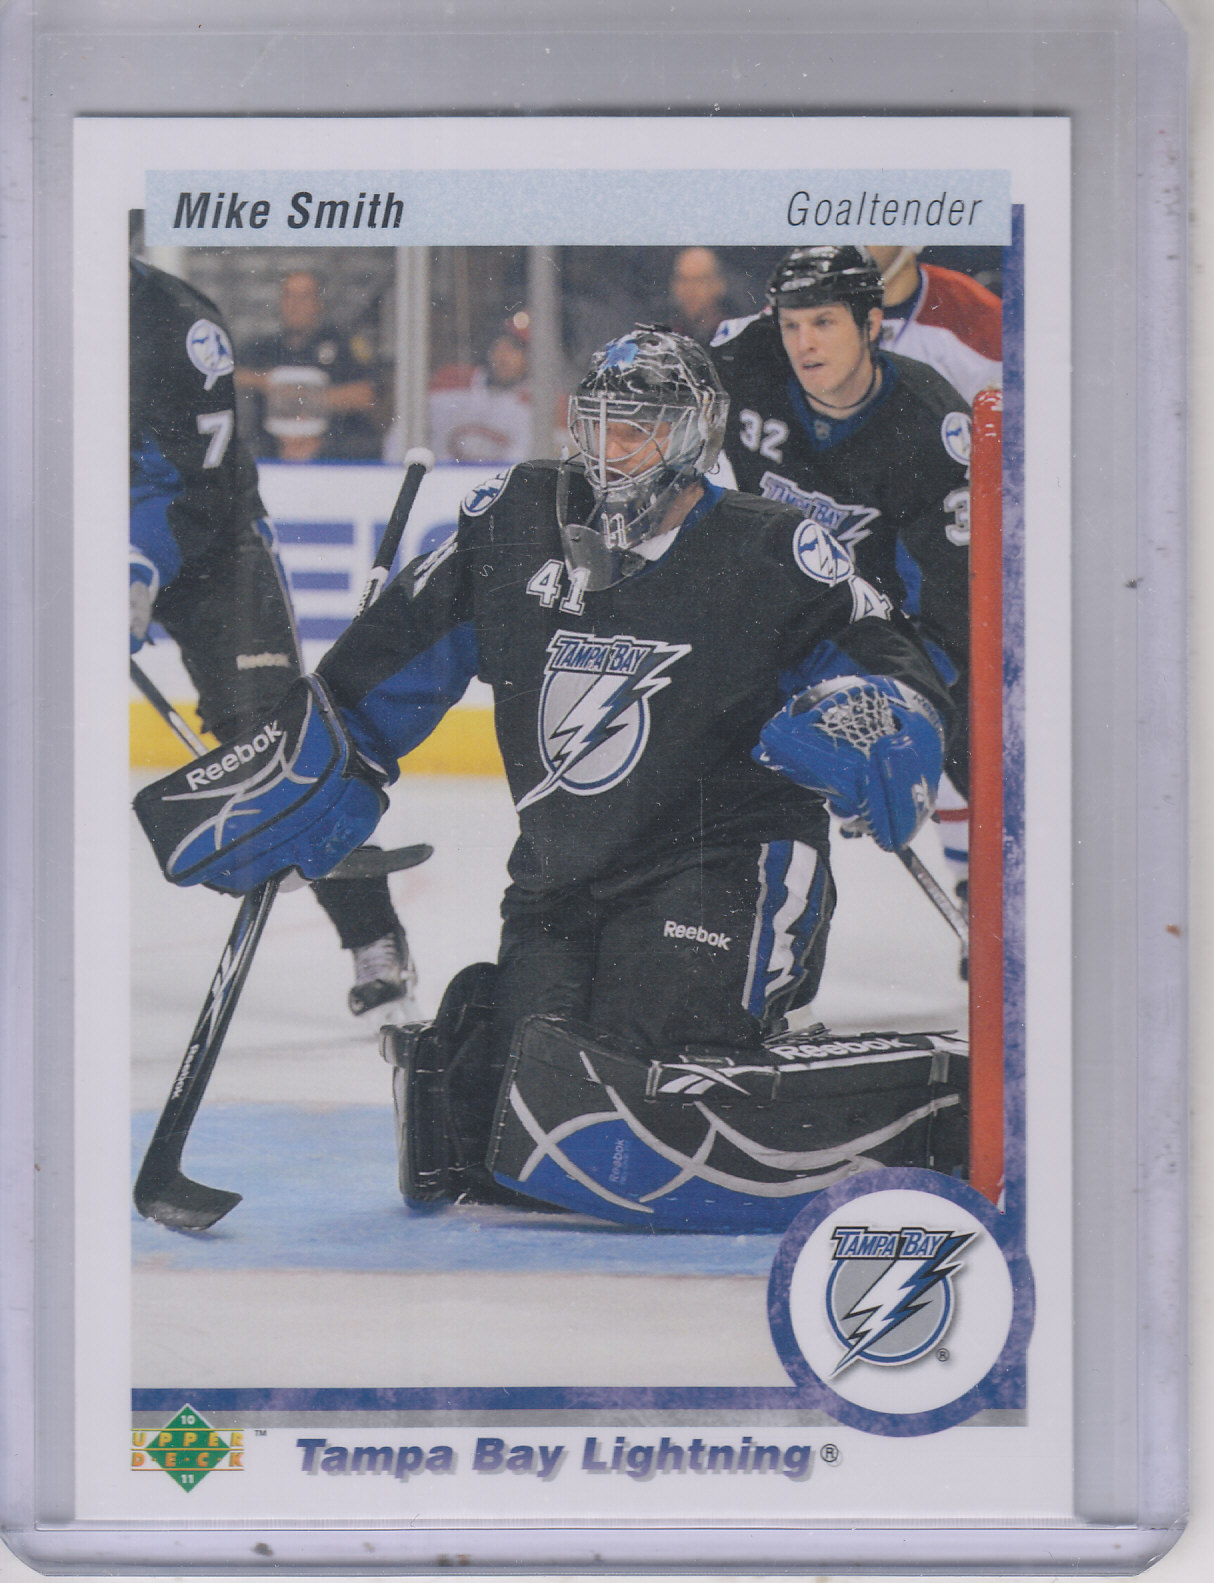 2010-11 Upper Deck 20th Anniversary Parallel #27 Mike Smith